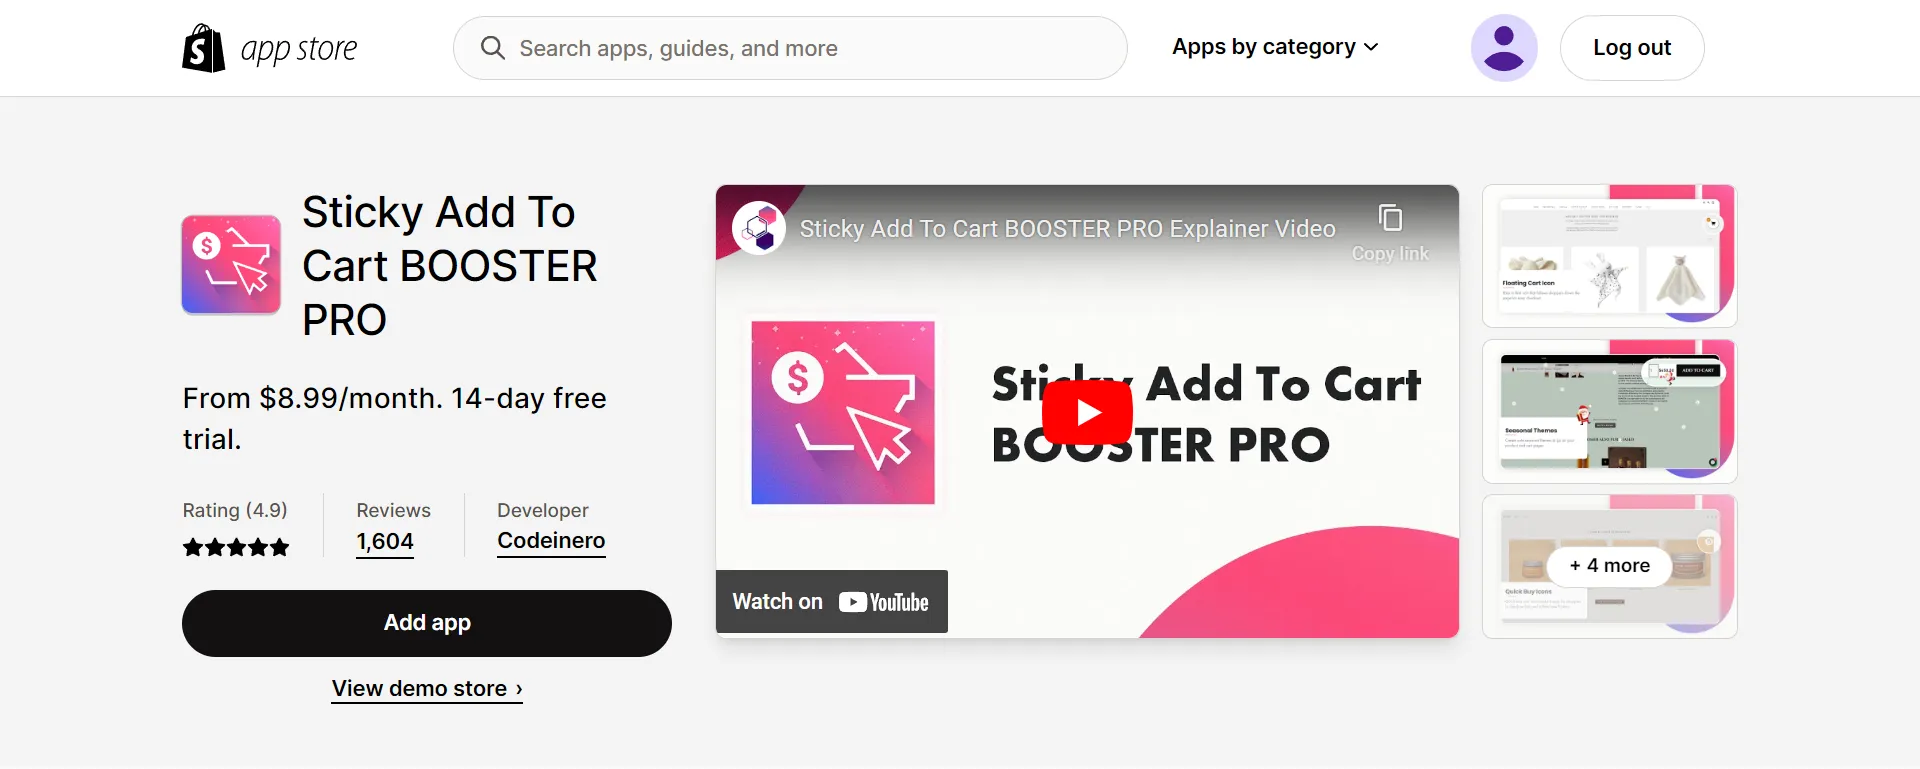 Sticky add-to-cart Booster Pro